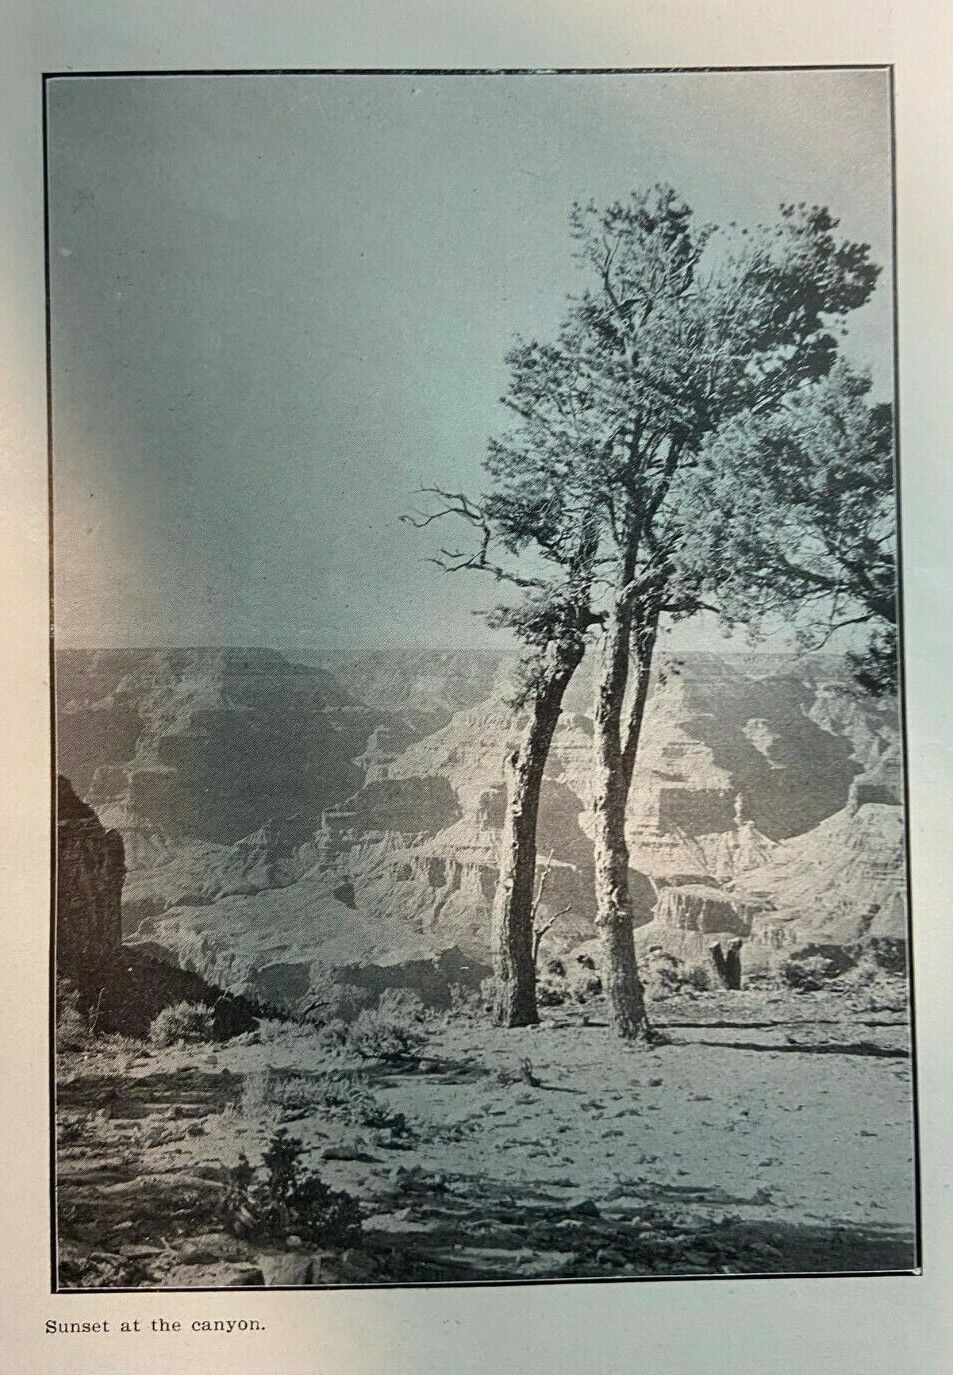 1904 Photographing the Grand Canyon illustrated